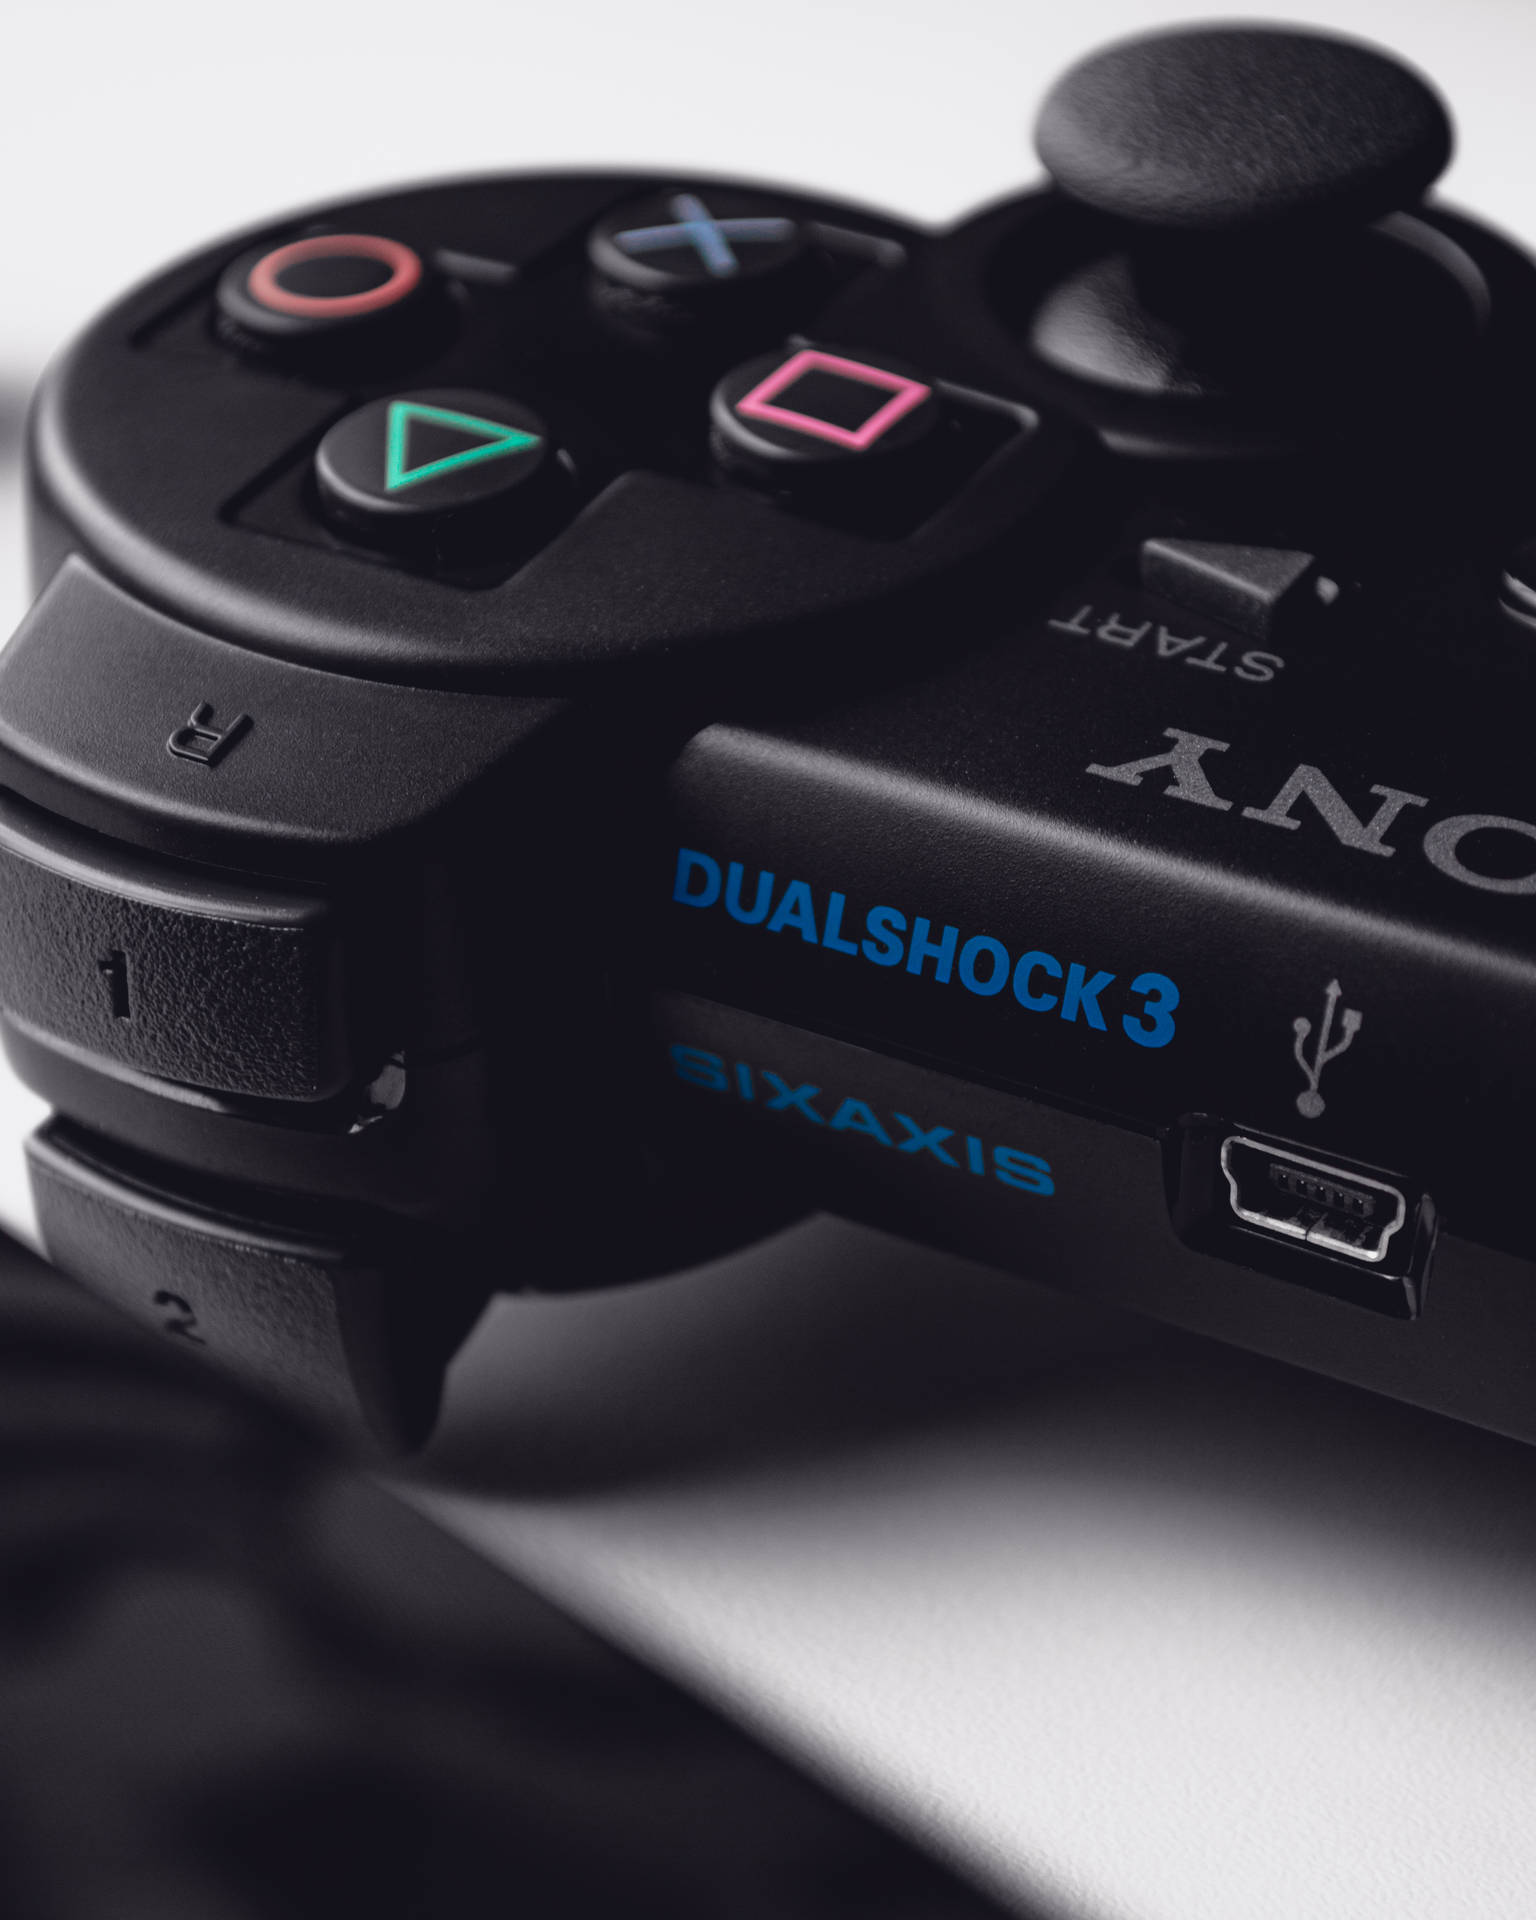 Sony Dualshock Ps3 Controller Background